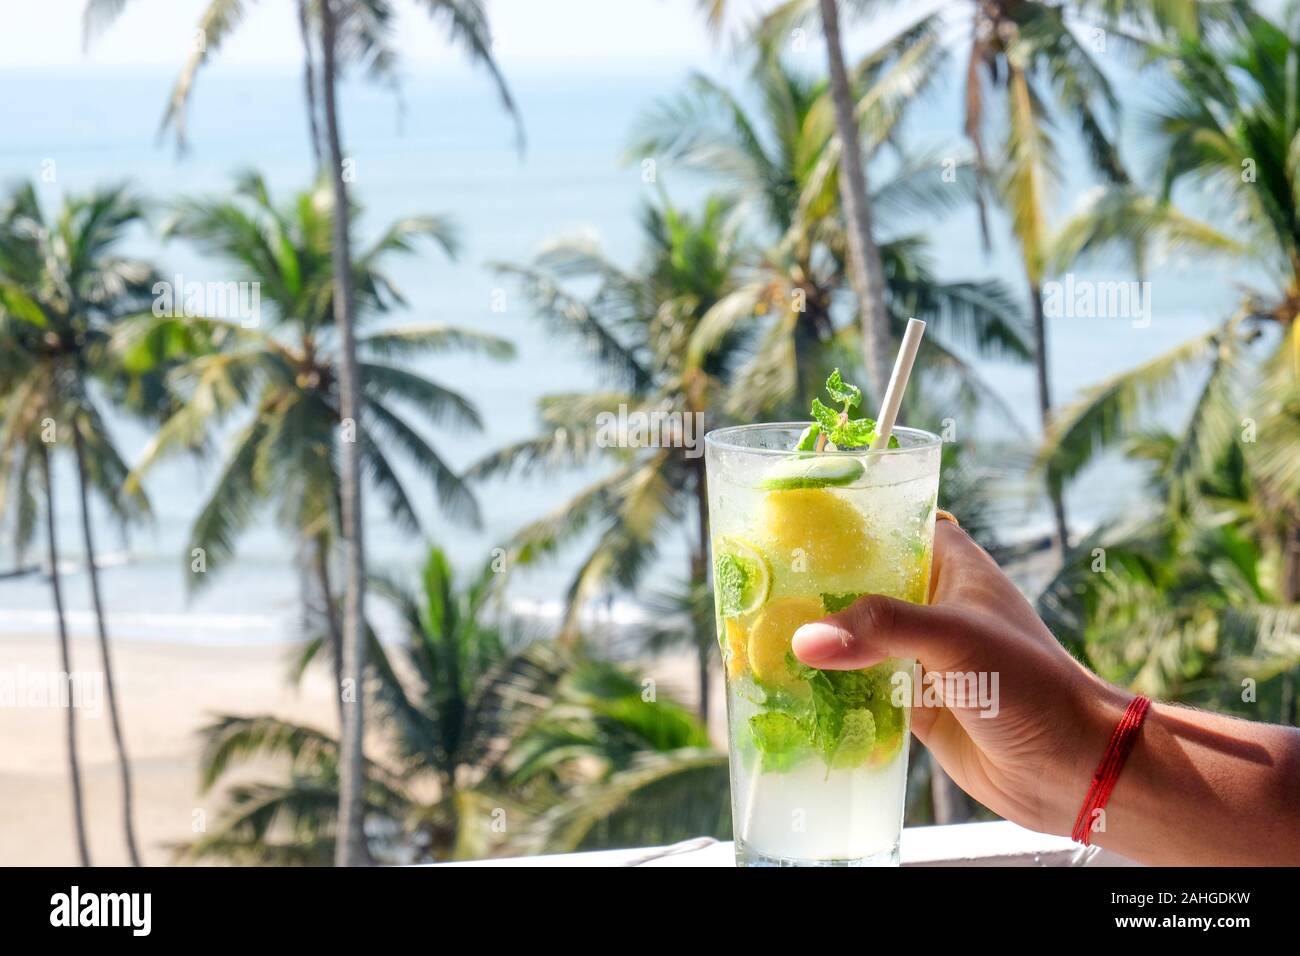 A young Asian man’s hand holding a virgin mojito cocktail brightly shining in the sunshine, behind is a tropical scene of palm trees, a sandy beach an Stock Photo